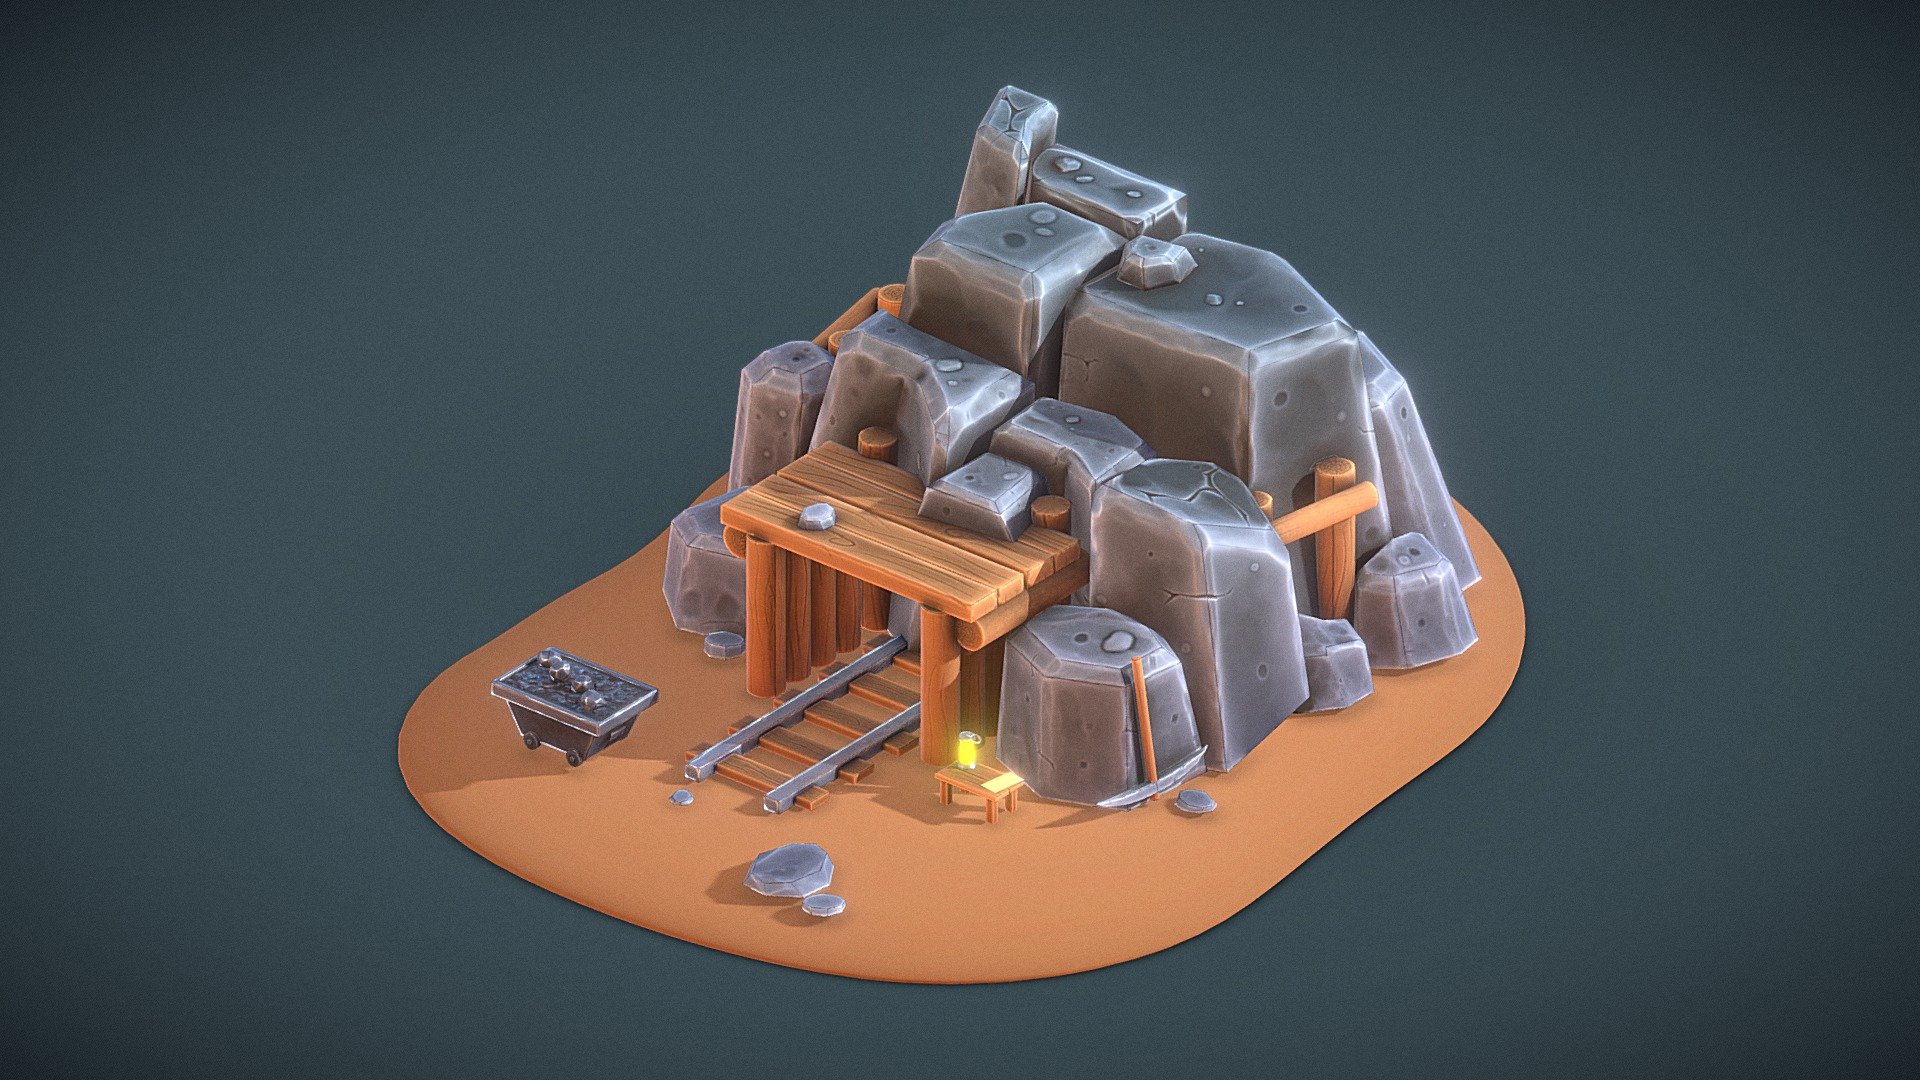 Hello, In this project, I have tried to model a mine environment based on a great concept by Sephiroth Art's isometric mineshaft.

here is the concept link below :
https://www.artstation.com/artwork/kkqR6

Hope you like it :) - Stylized Mine - 3D model by Gizem (@itsgizem) 3d model